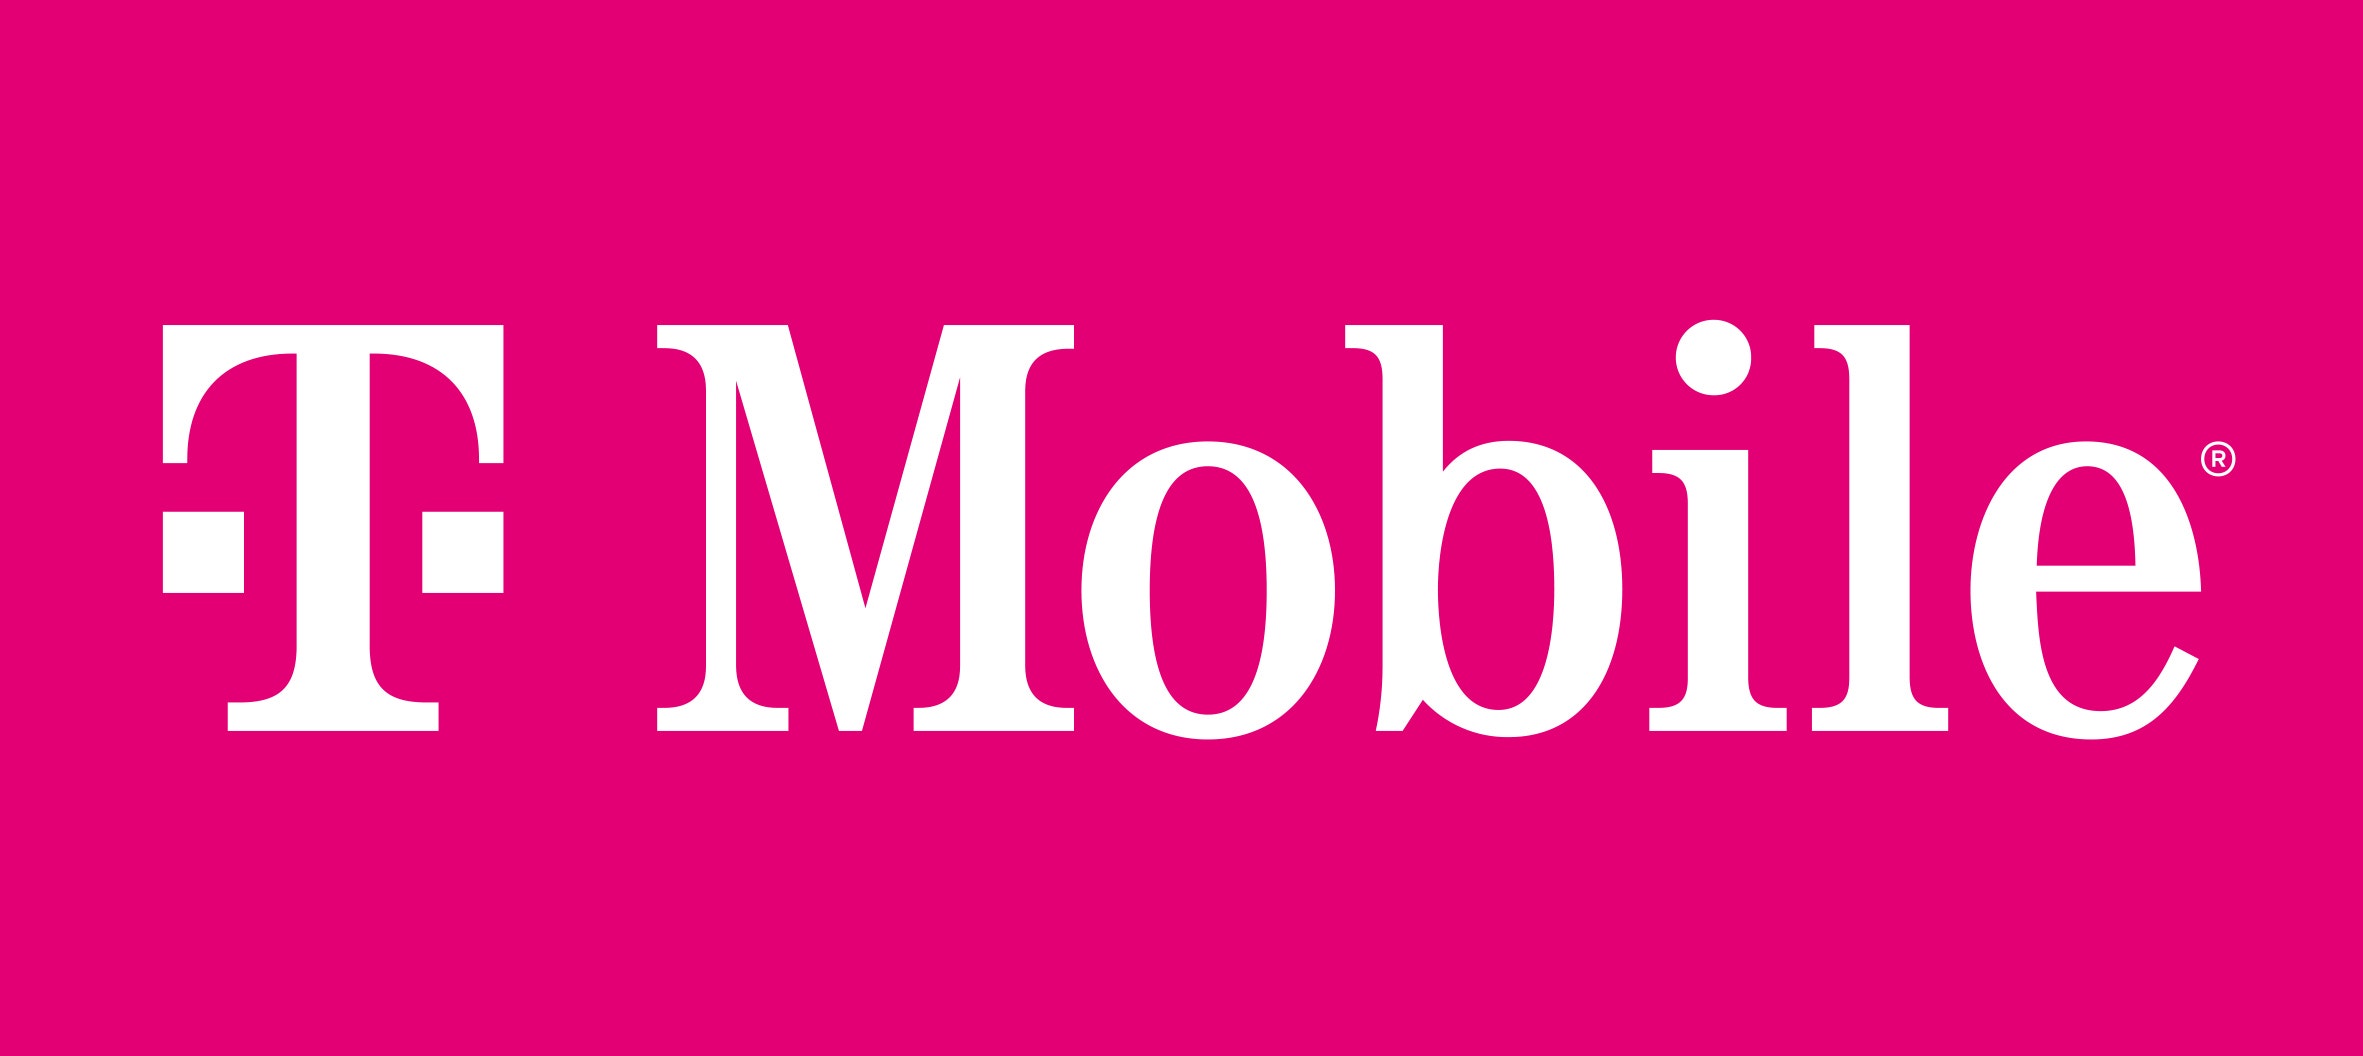 T-Mobile Offers Massive $14B Stock Buyback But Hasn't Paid A Dividend Since 2015